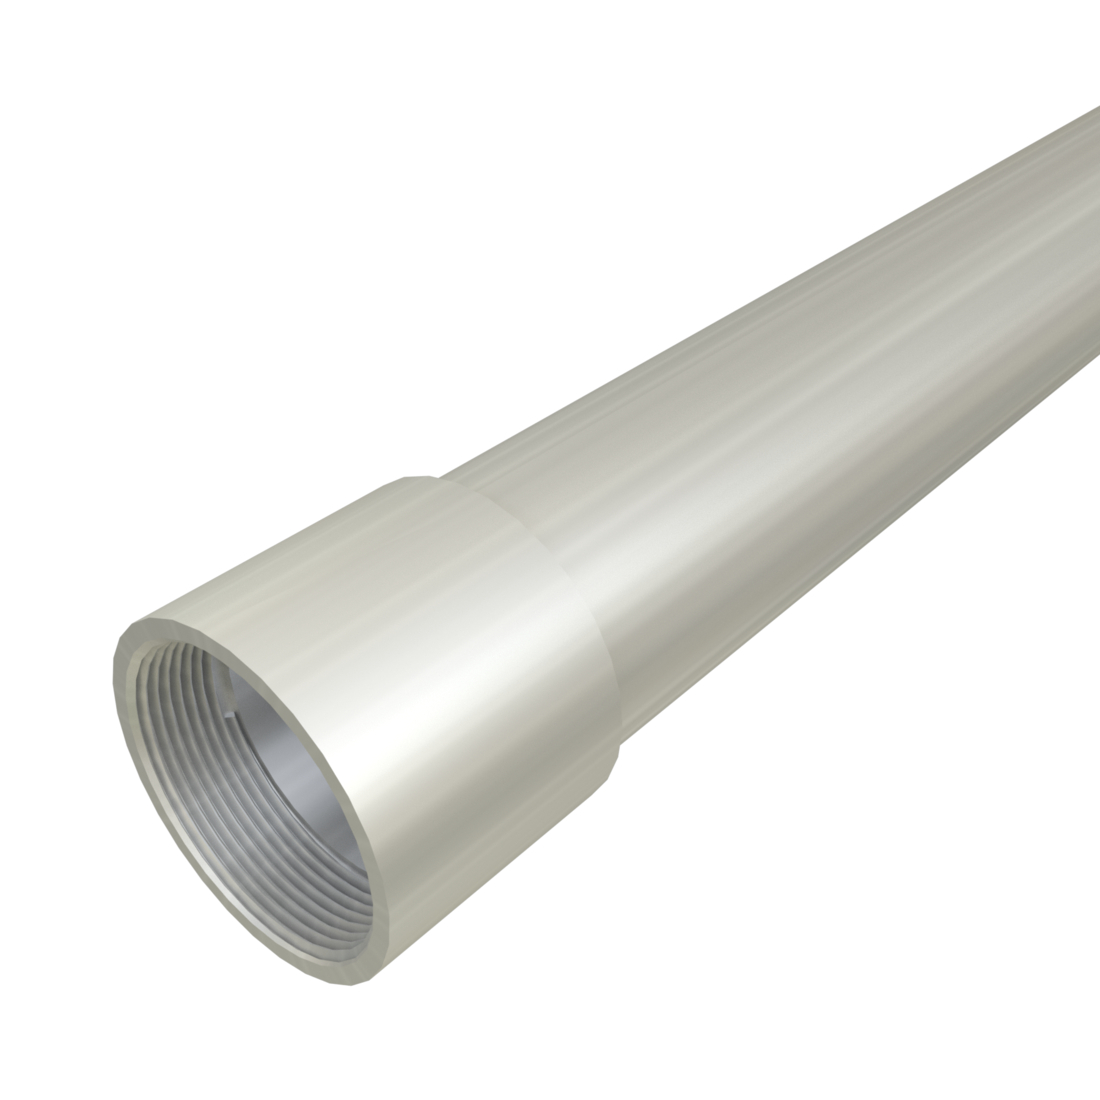 Specialty Steel Conduit-Adding Value to Electrical Raceway Installations